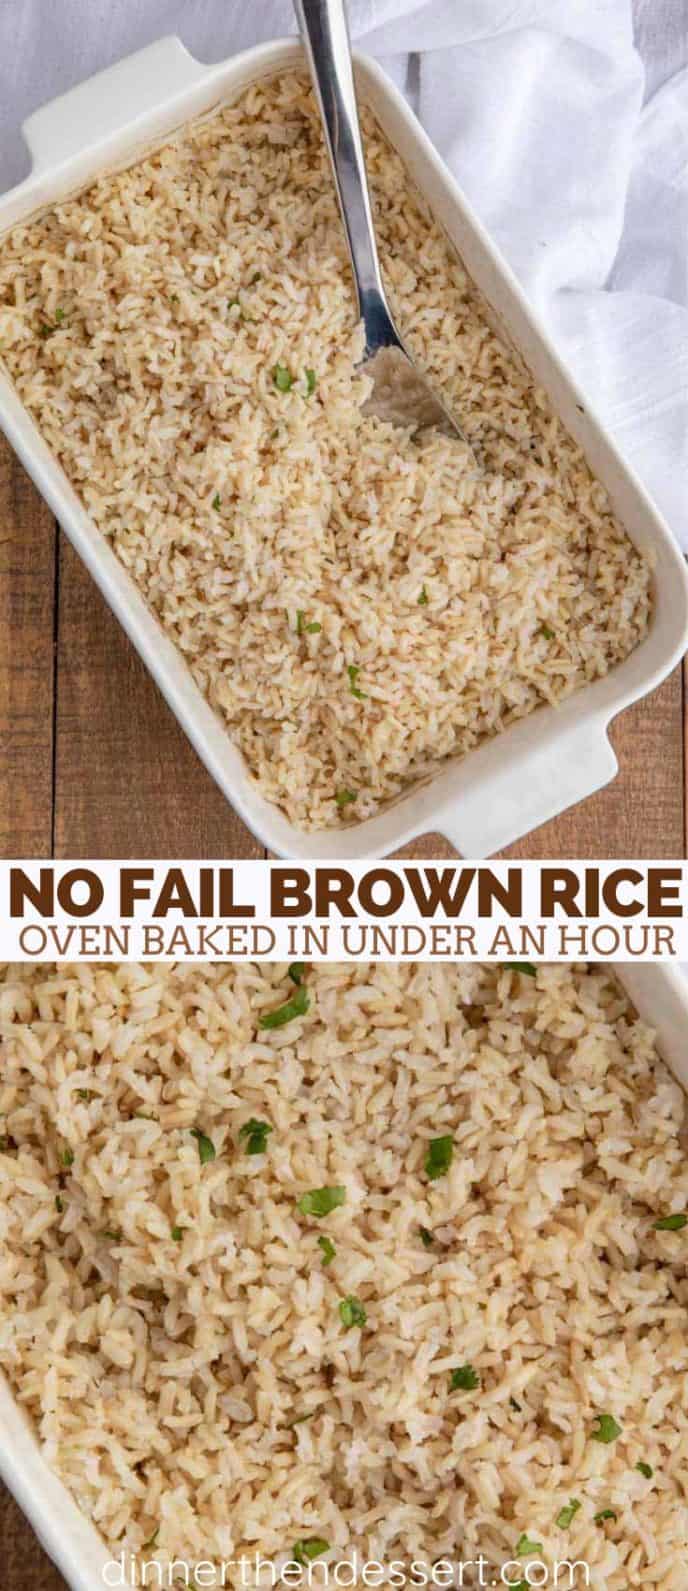 Oven Baked Brown Rice